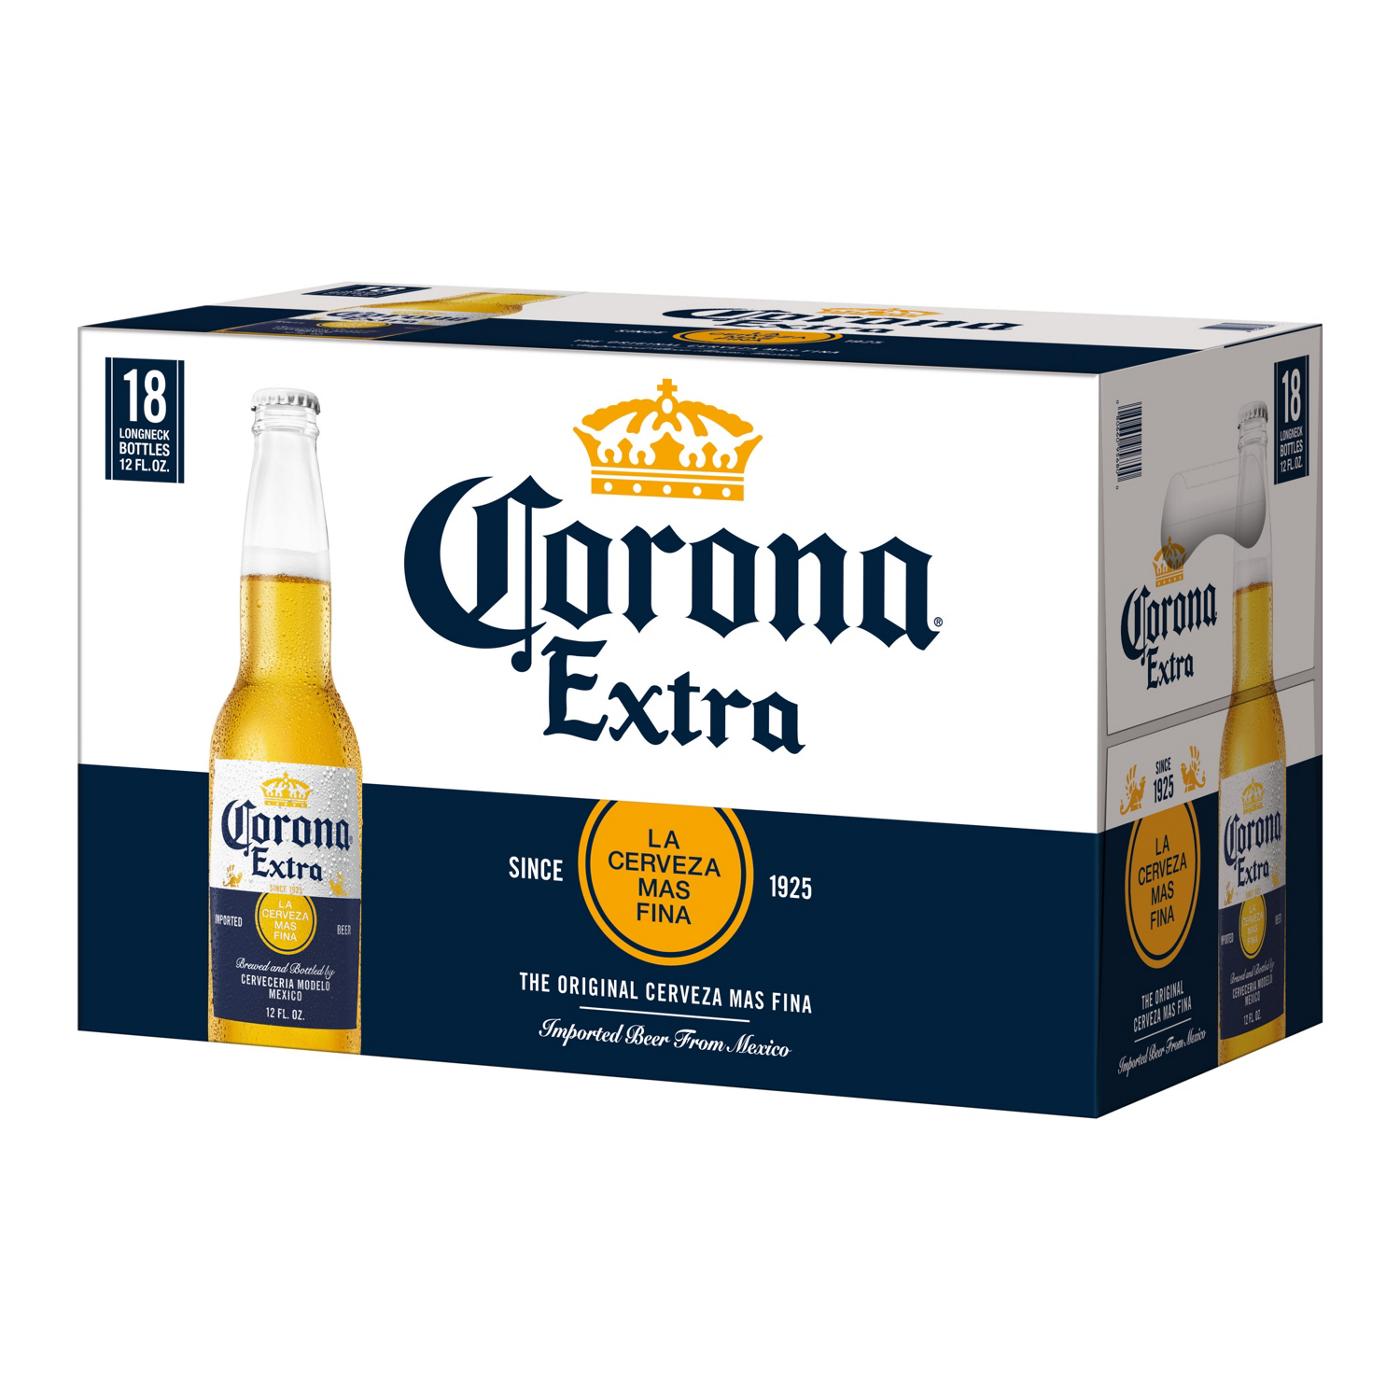 Corona Extra Mexican Lager Import Beer 12 oz Bottles, 18 pk; image 3 of 10